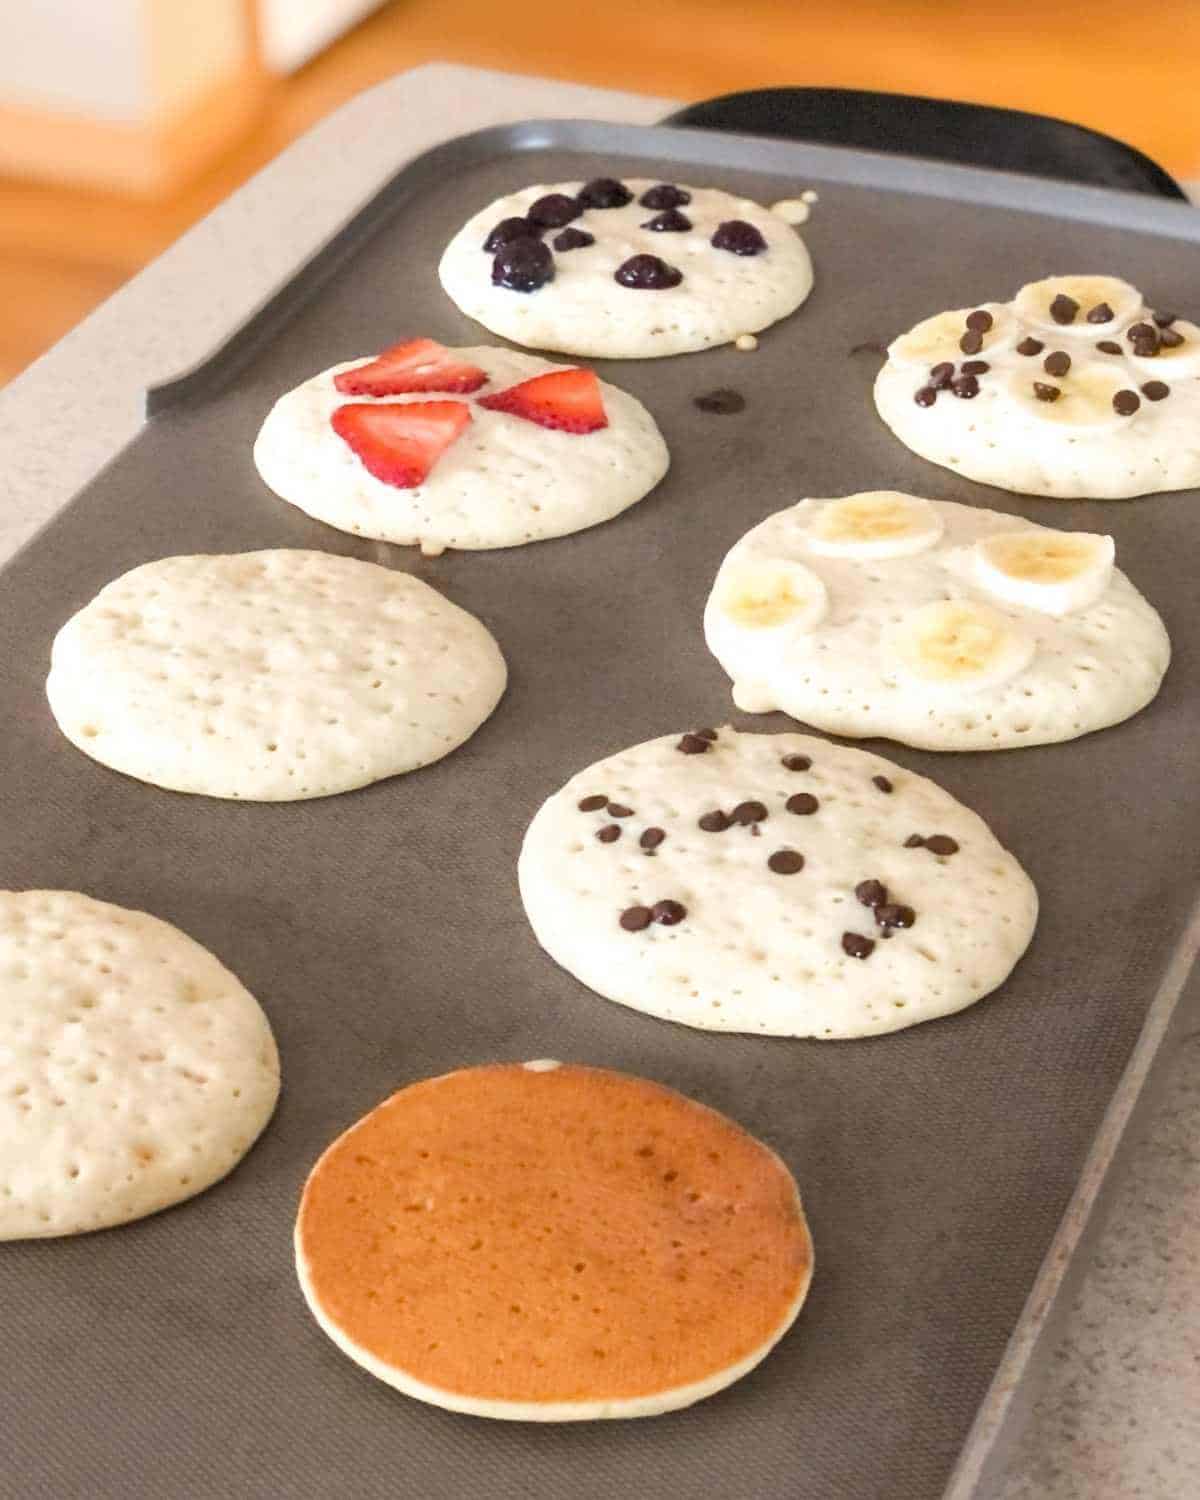 Oat milk pancakes being cooked on a griddle.